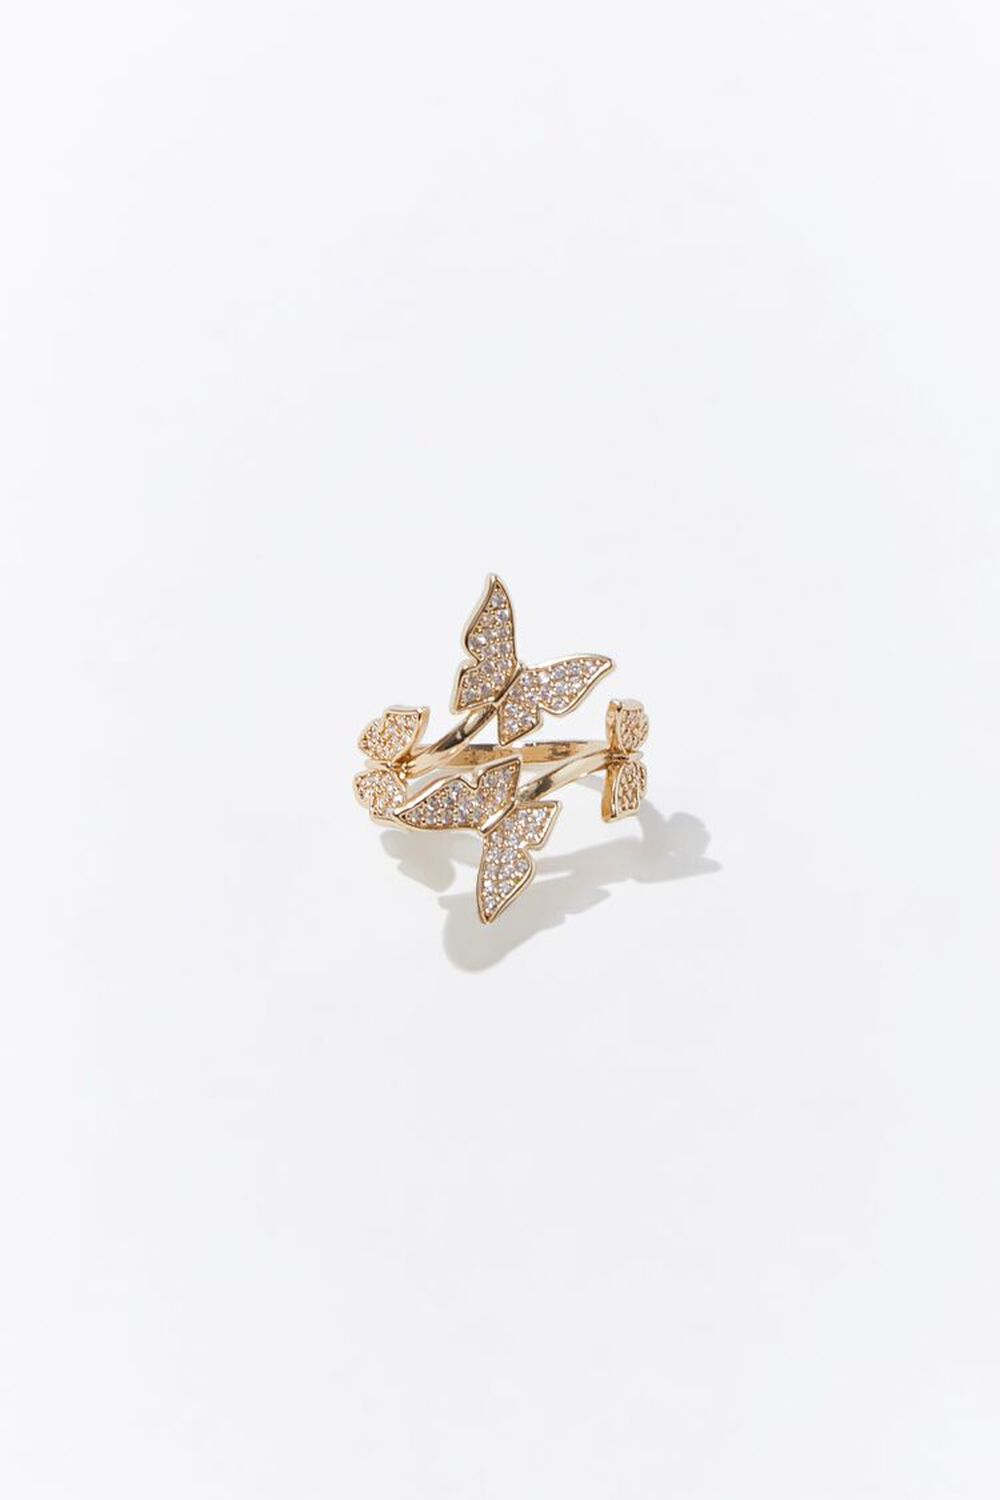 GOLD Butterfly Charm Cocktail Ring, image 1